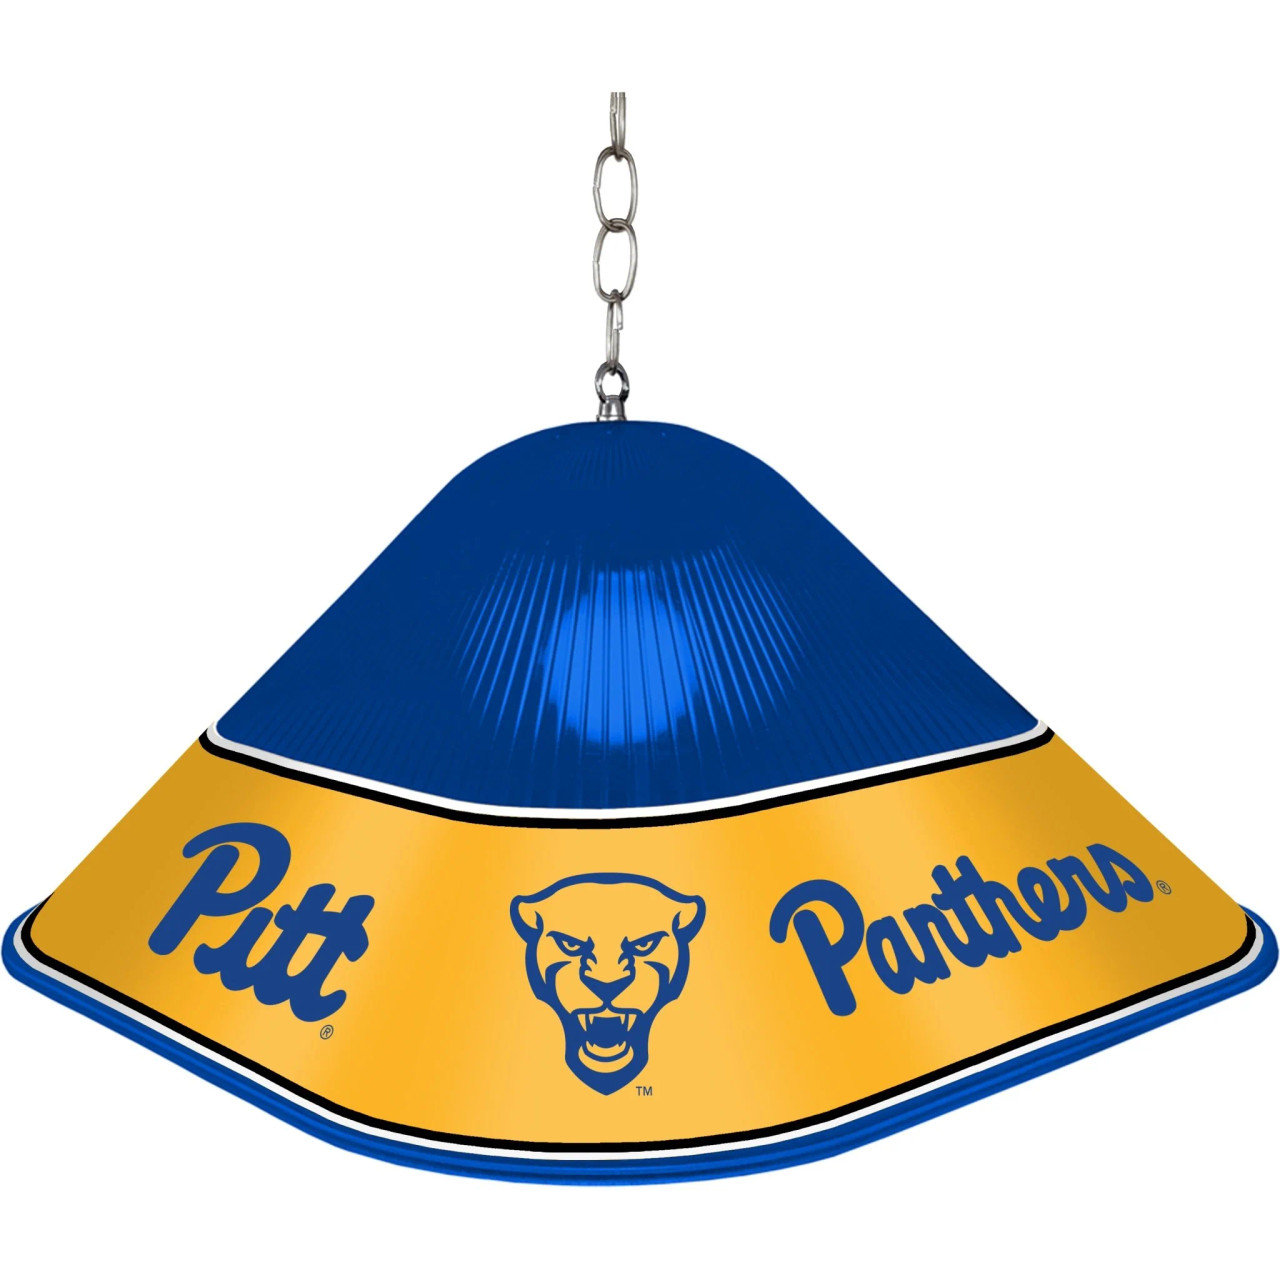 PITT, PIT, Pittsburgh, Panthers, Game, Room, Cave, Table, Light, Lamp, NCPITT-410-01A, NCPITT-410-01B, The Fan-Brand, 686082112734